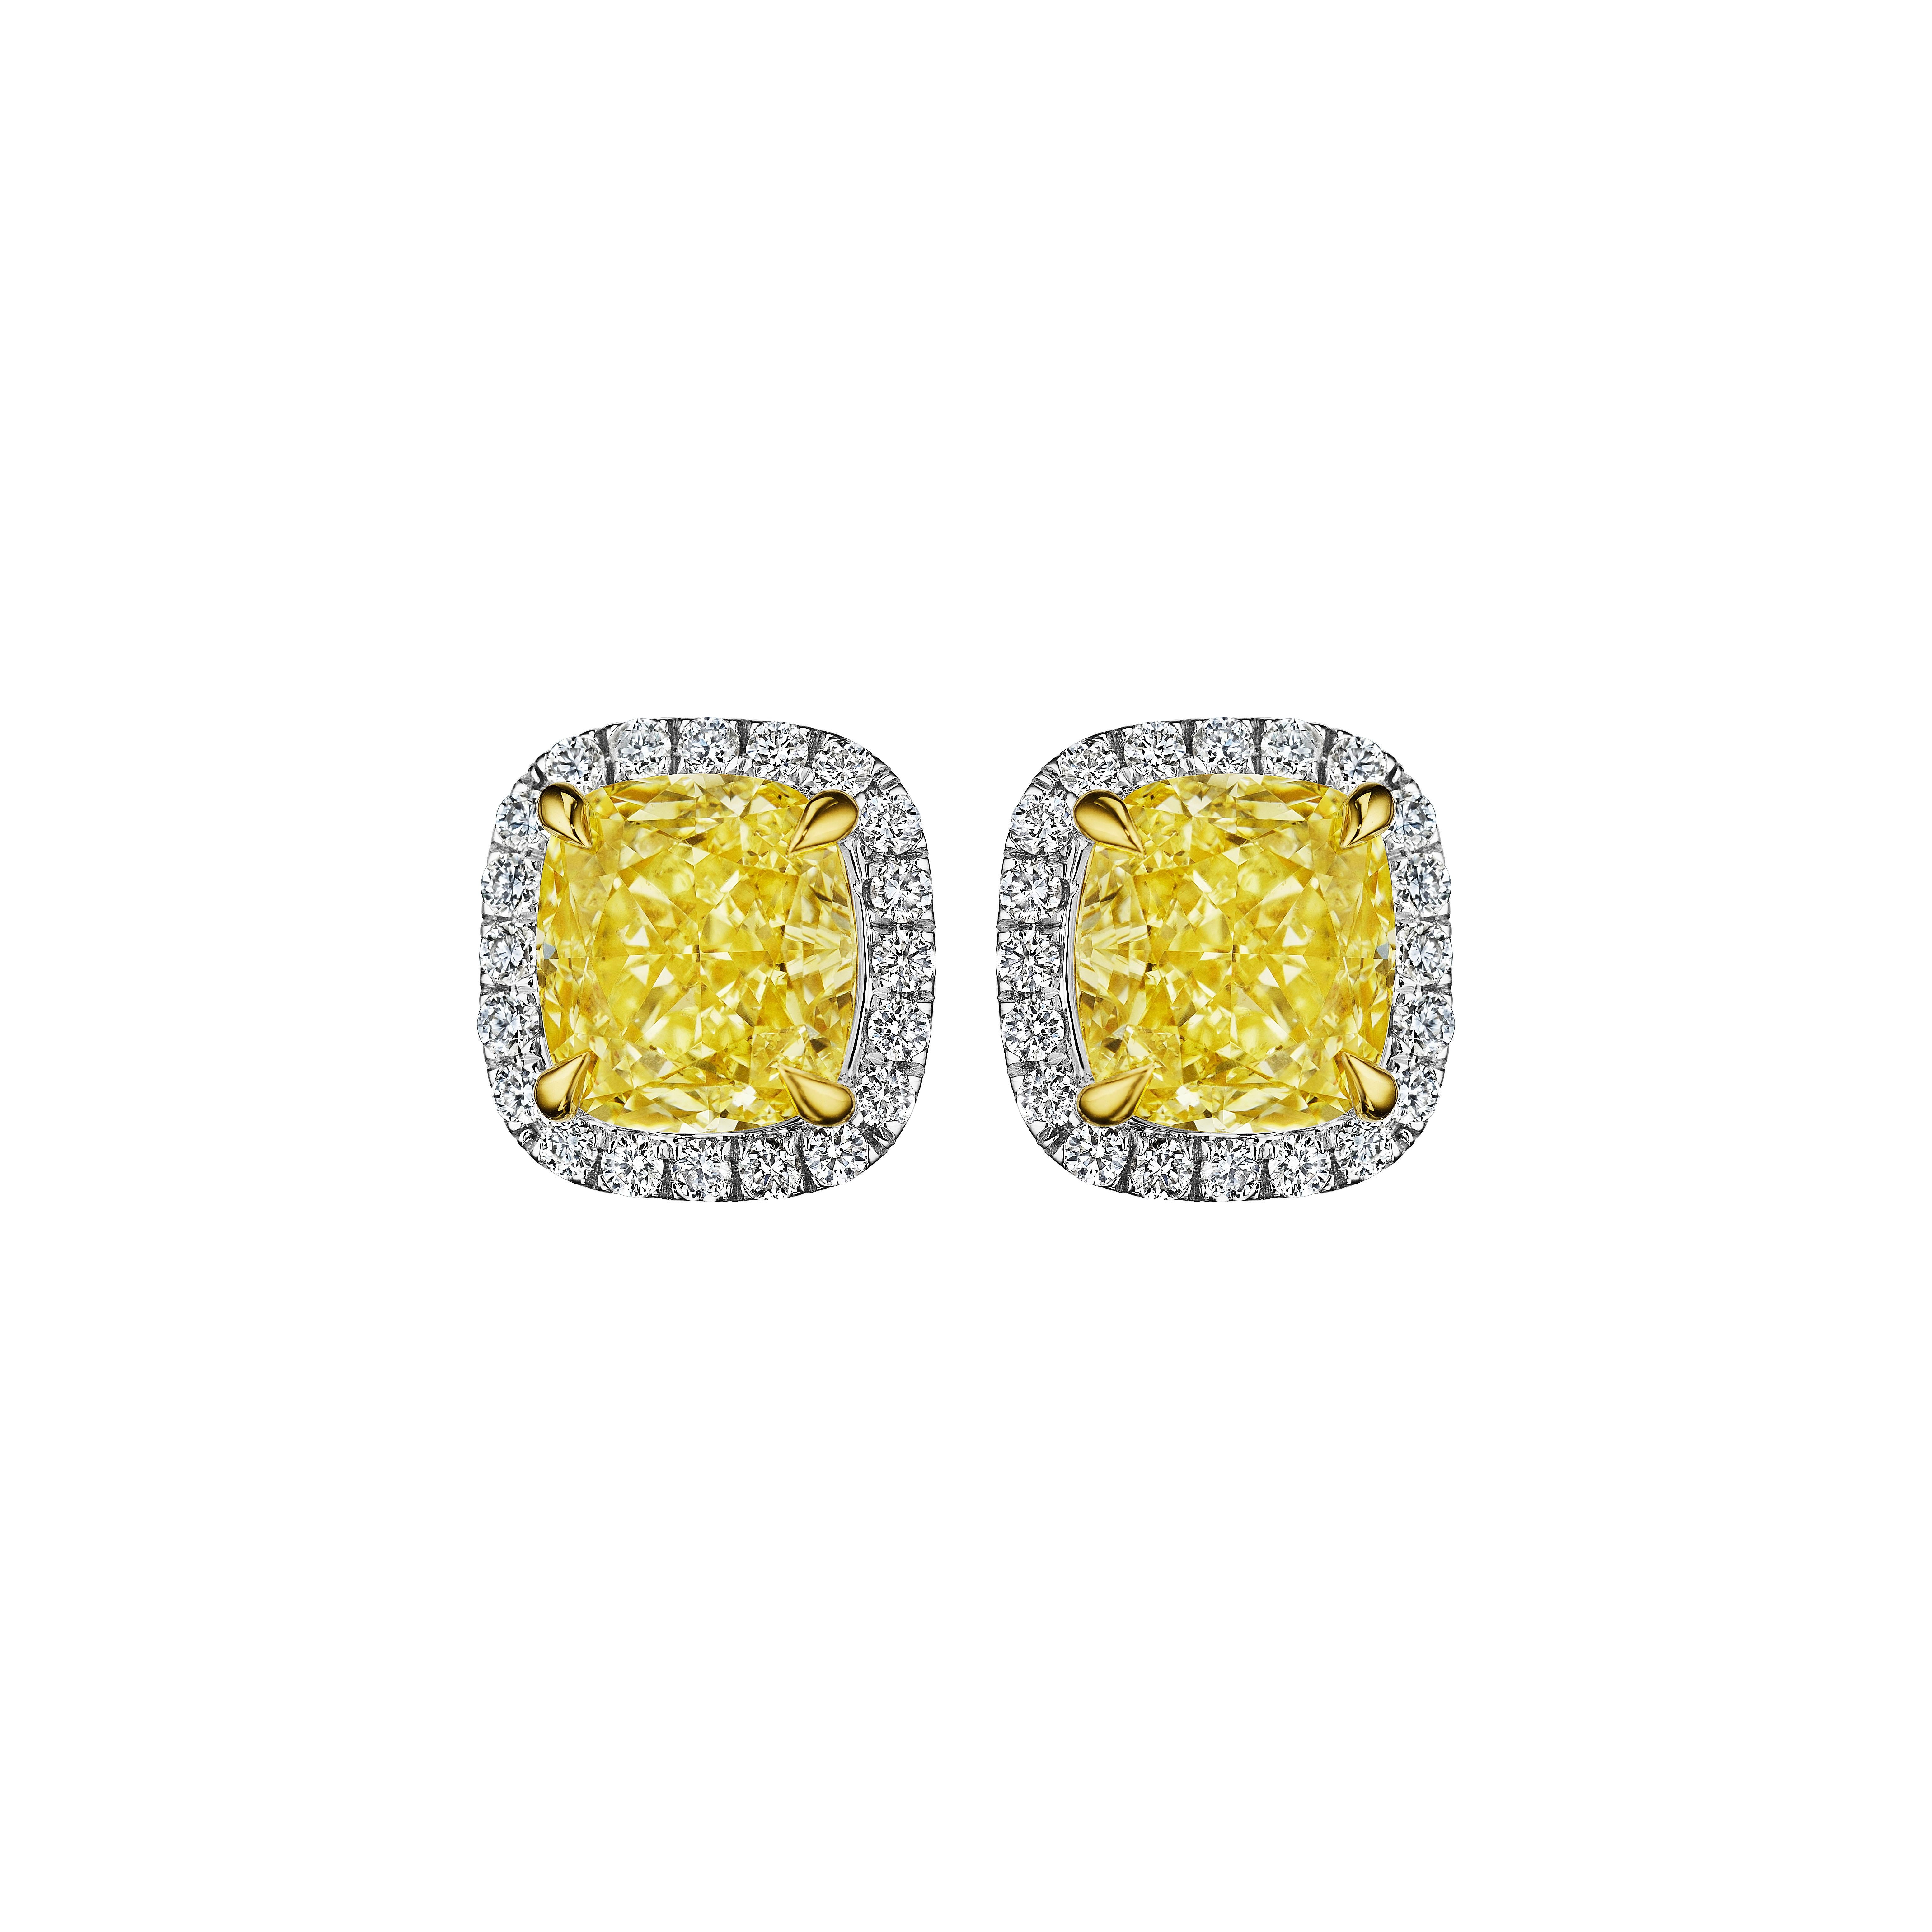 Cushion Cut 4.24ct GIA Certified Fancy Yellow Cushion & Round Diamond Earrings in 18KT Gold For Sale